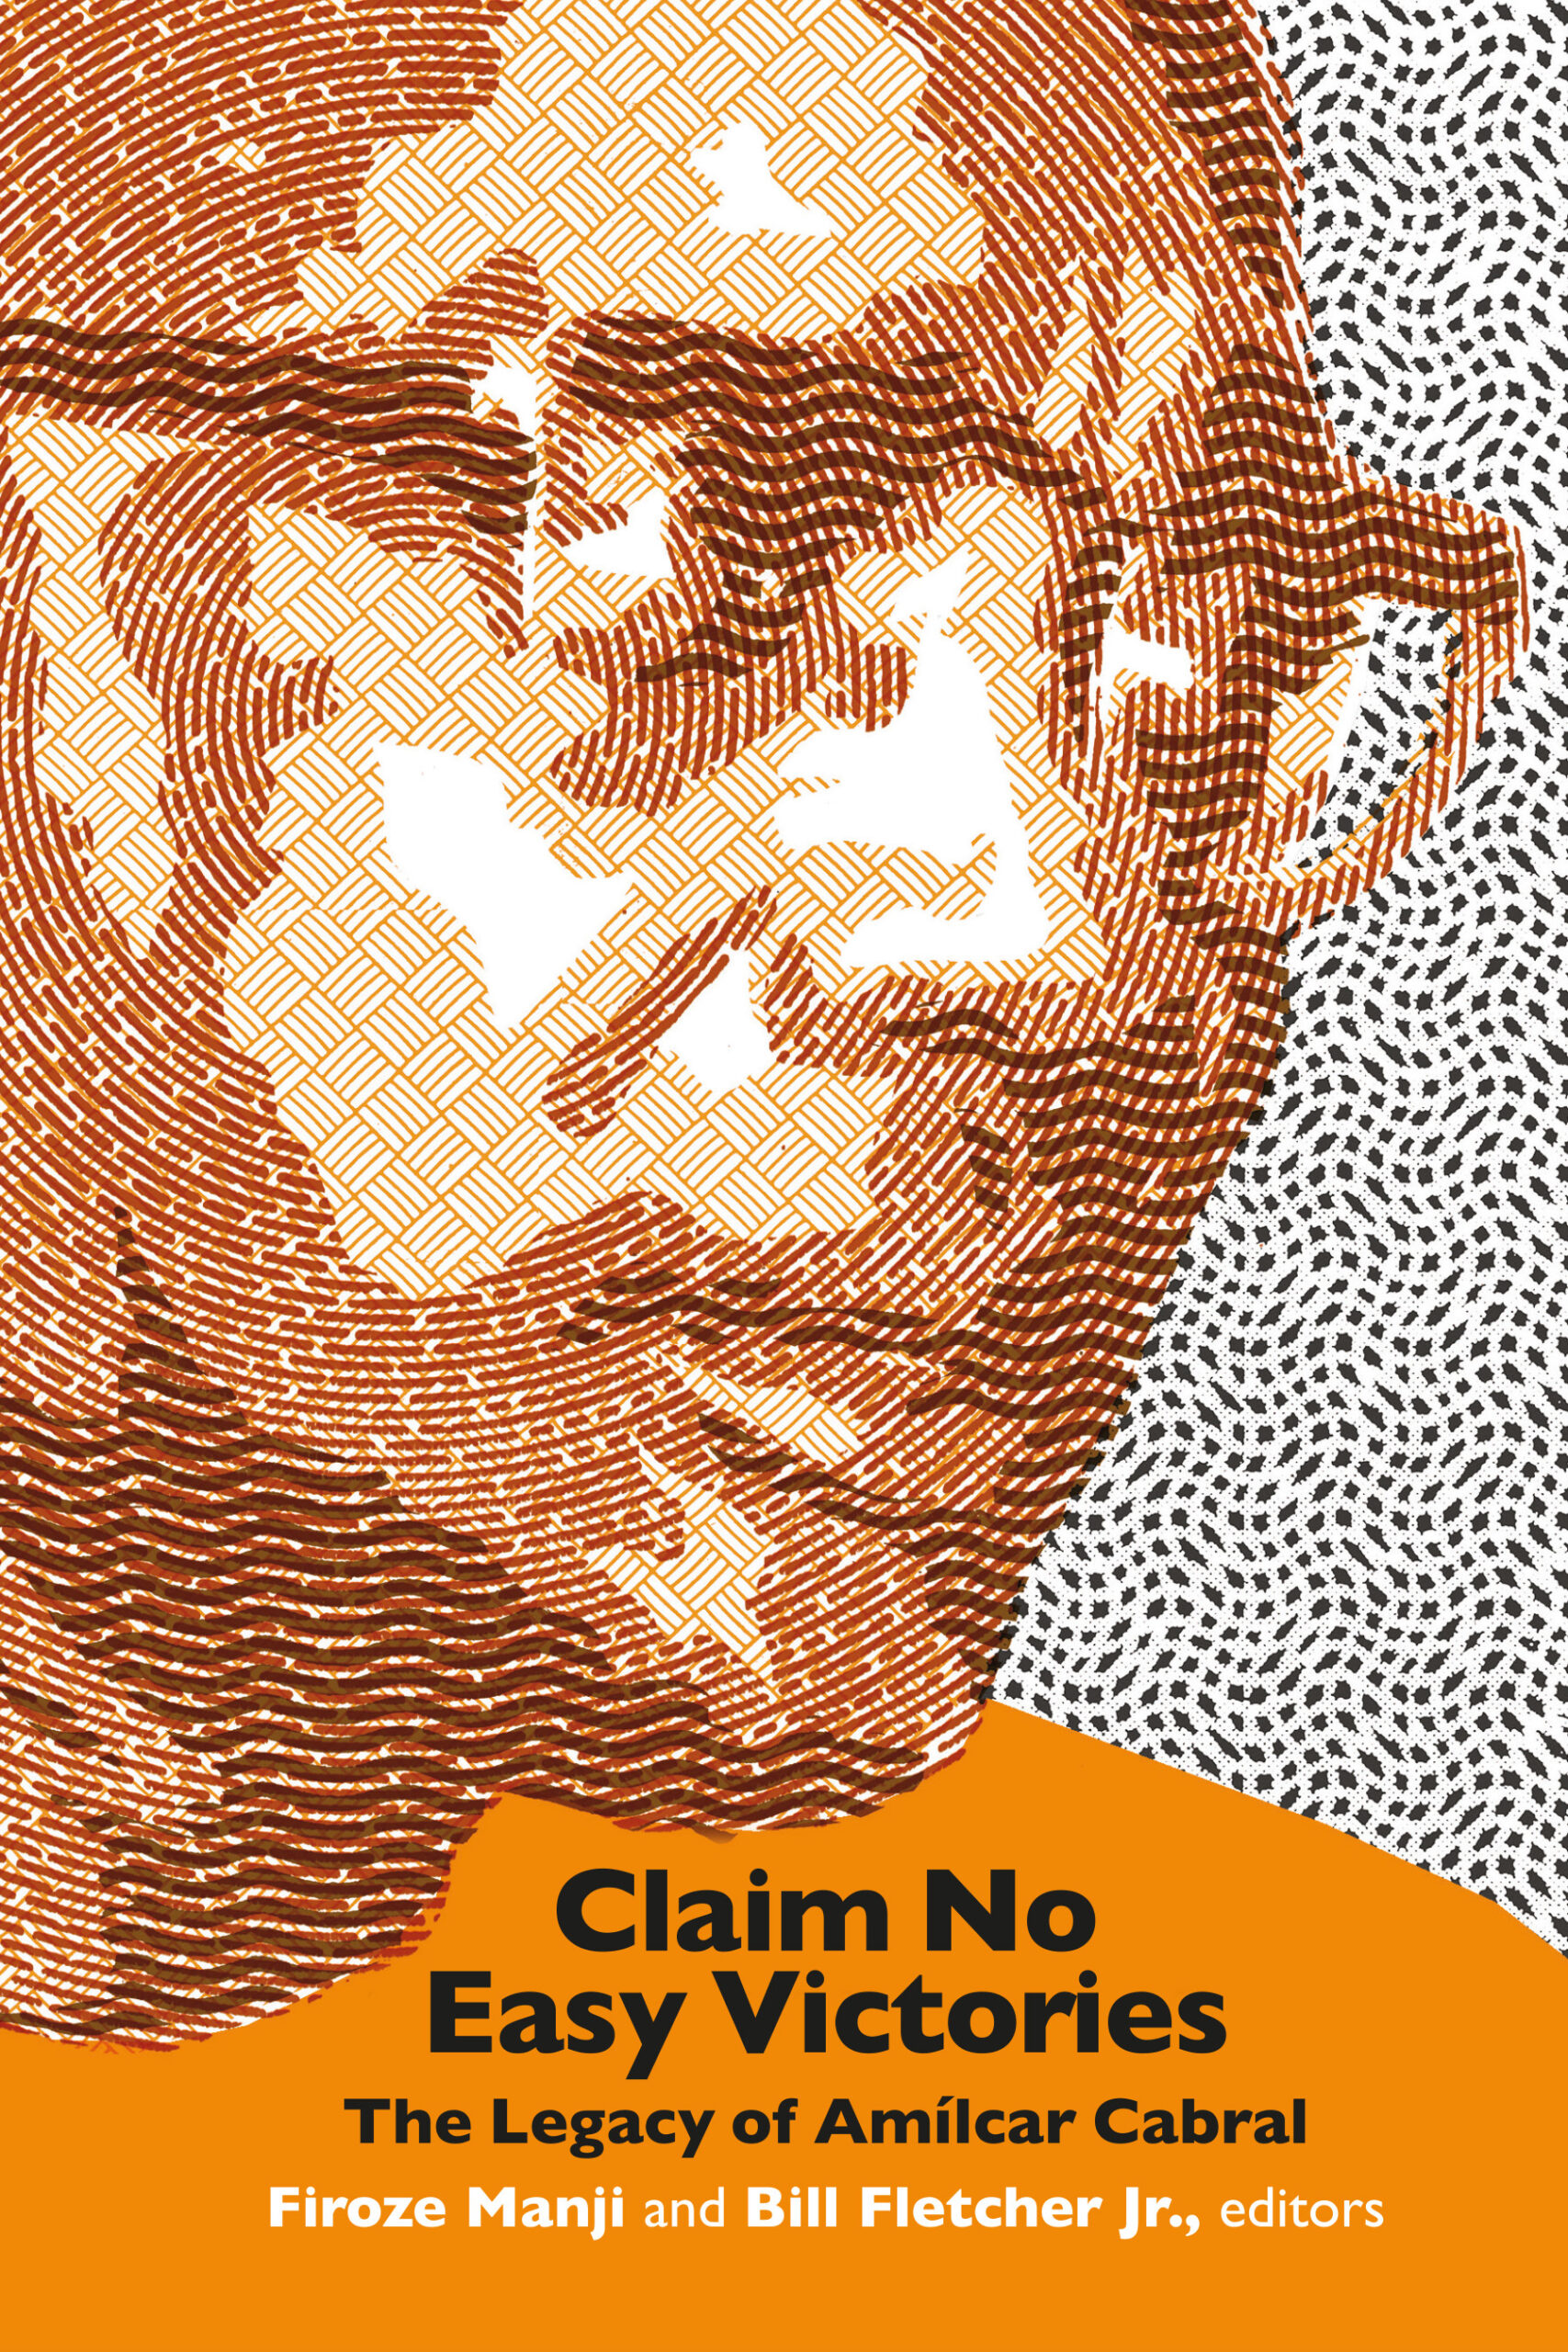 Claim No Easy Victories: The Legacy of Amilcar Cabral (New & Expanded edition)